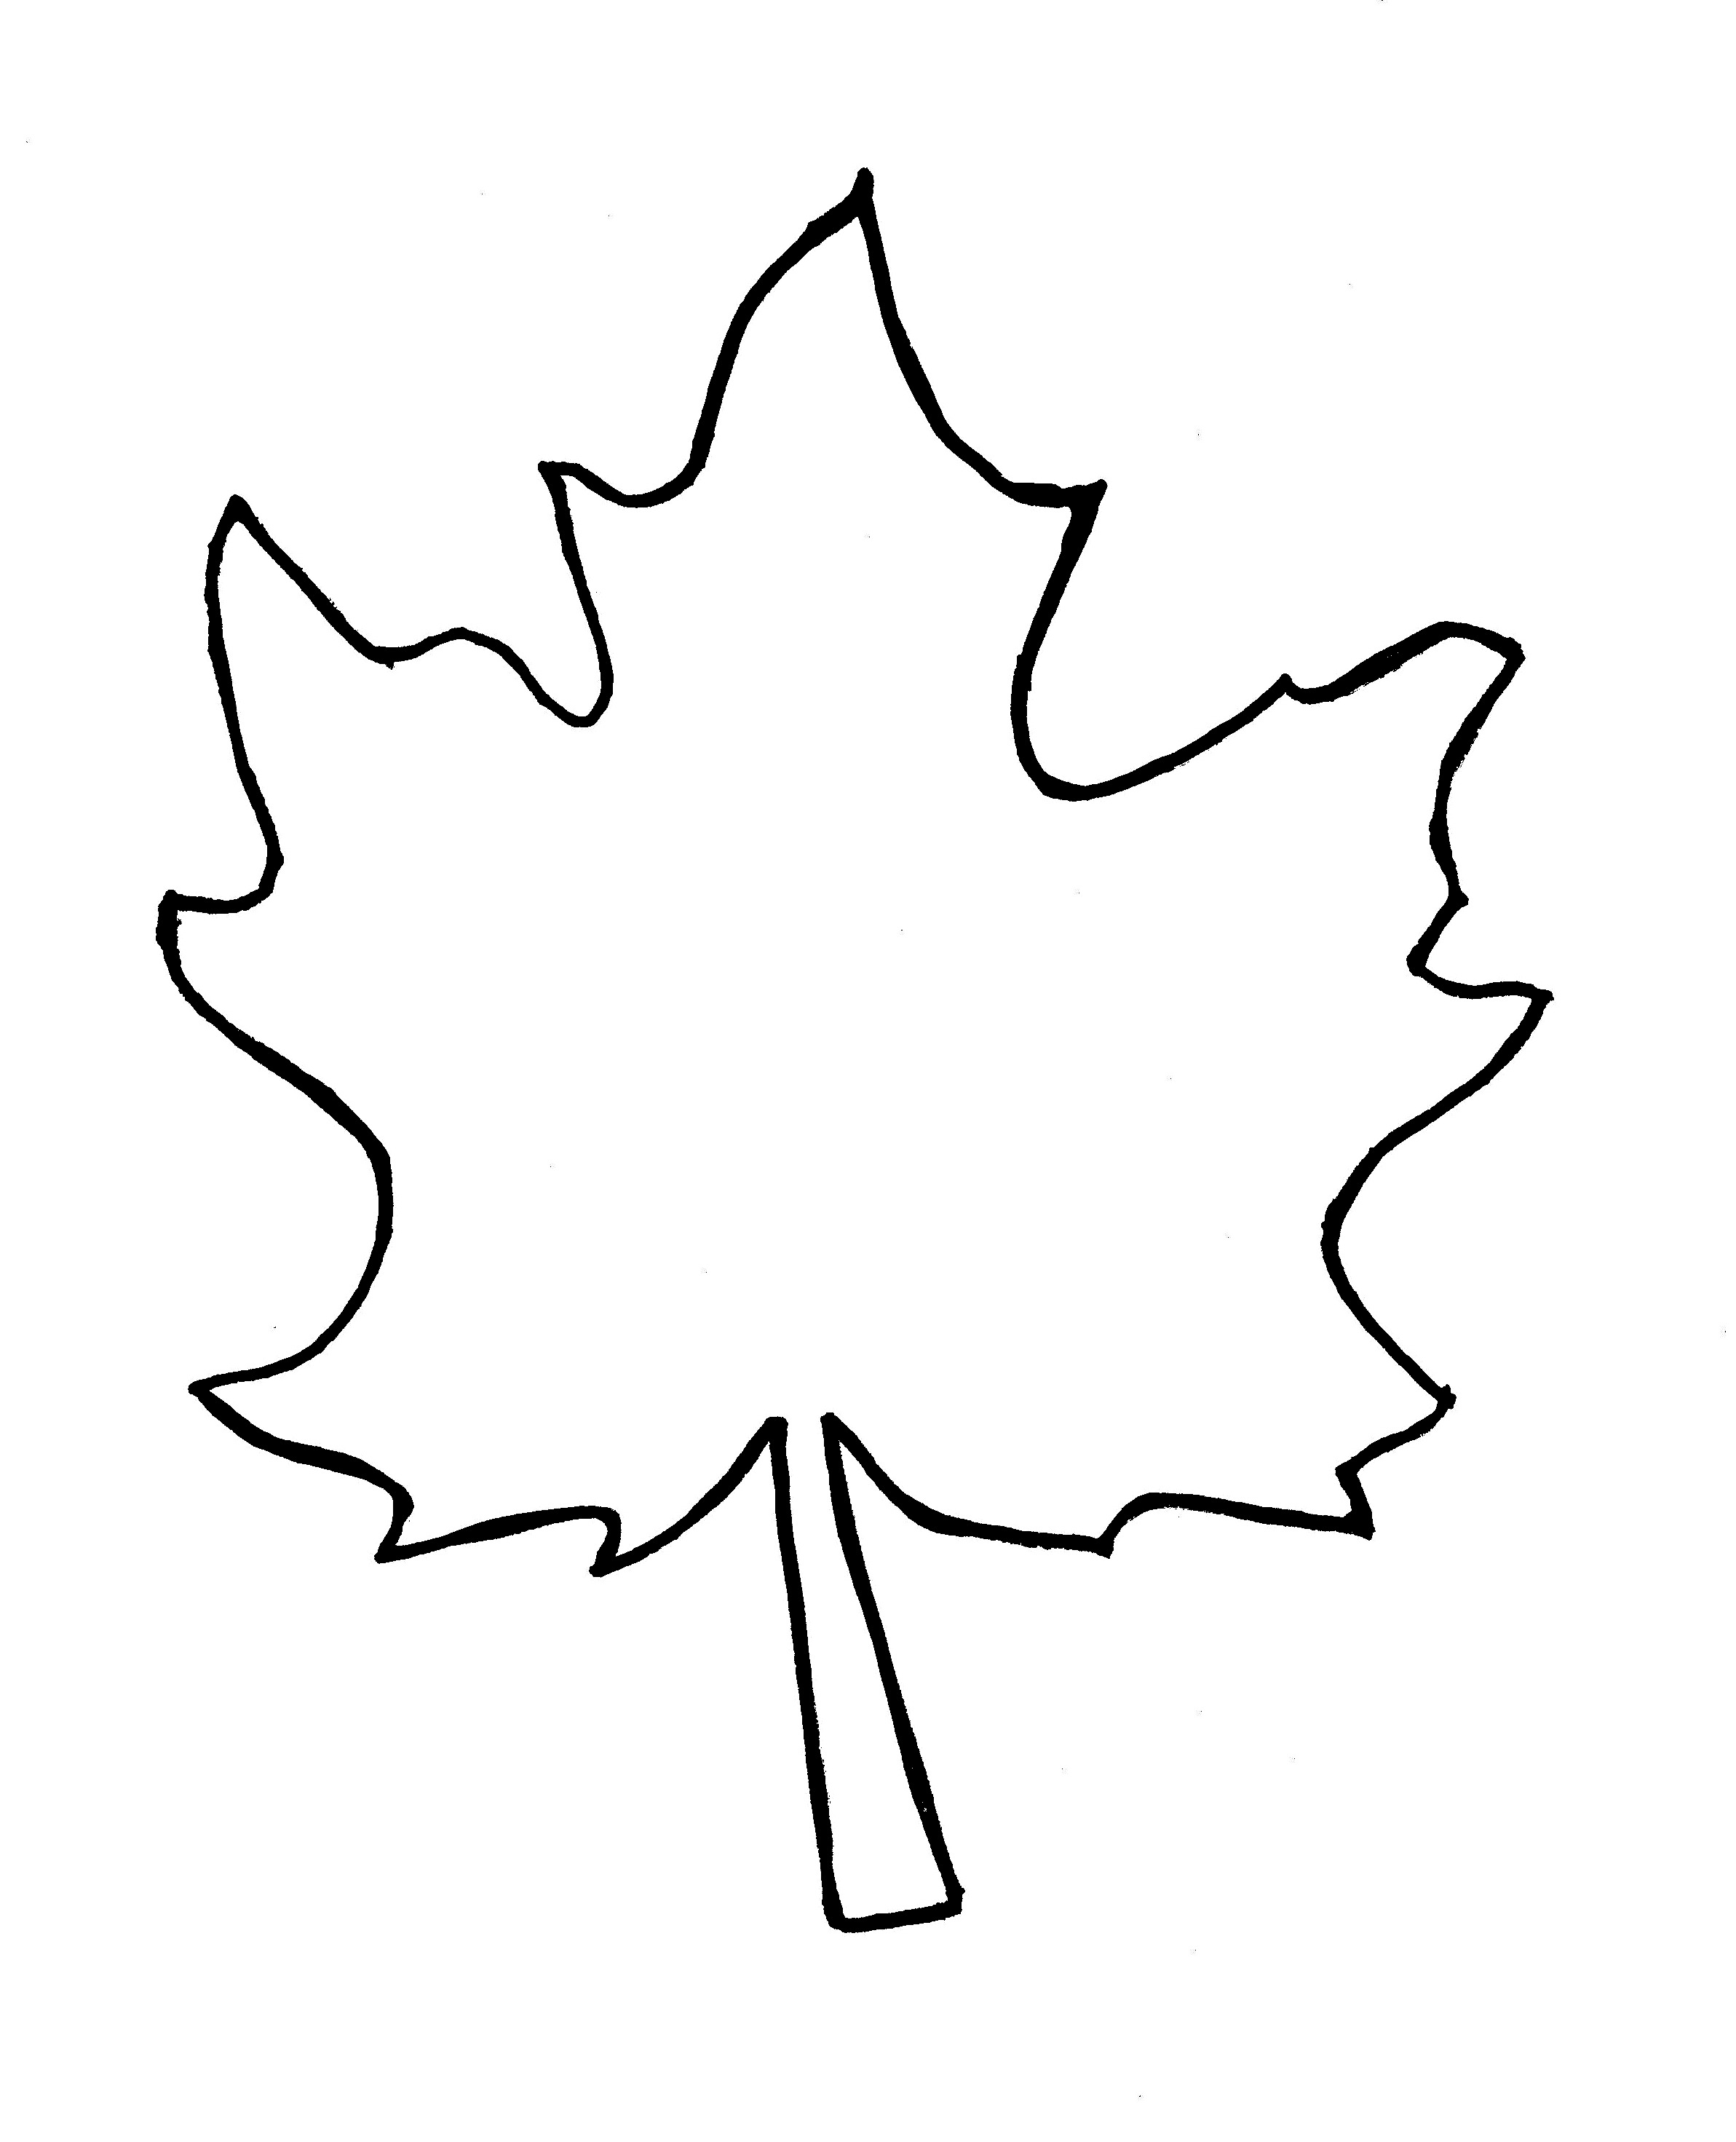 Autumn Maple Leaf PNG Picture, Line Art Of Autumn Maple Leaf, Leaf Drawing,  Leaf Sketch, Autumn PNG Image For Free Download